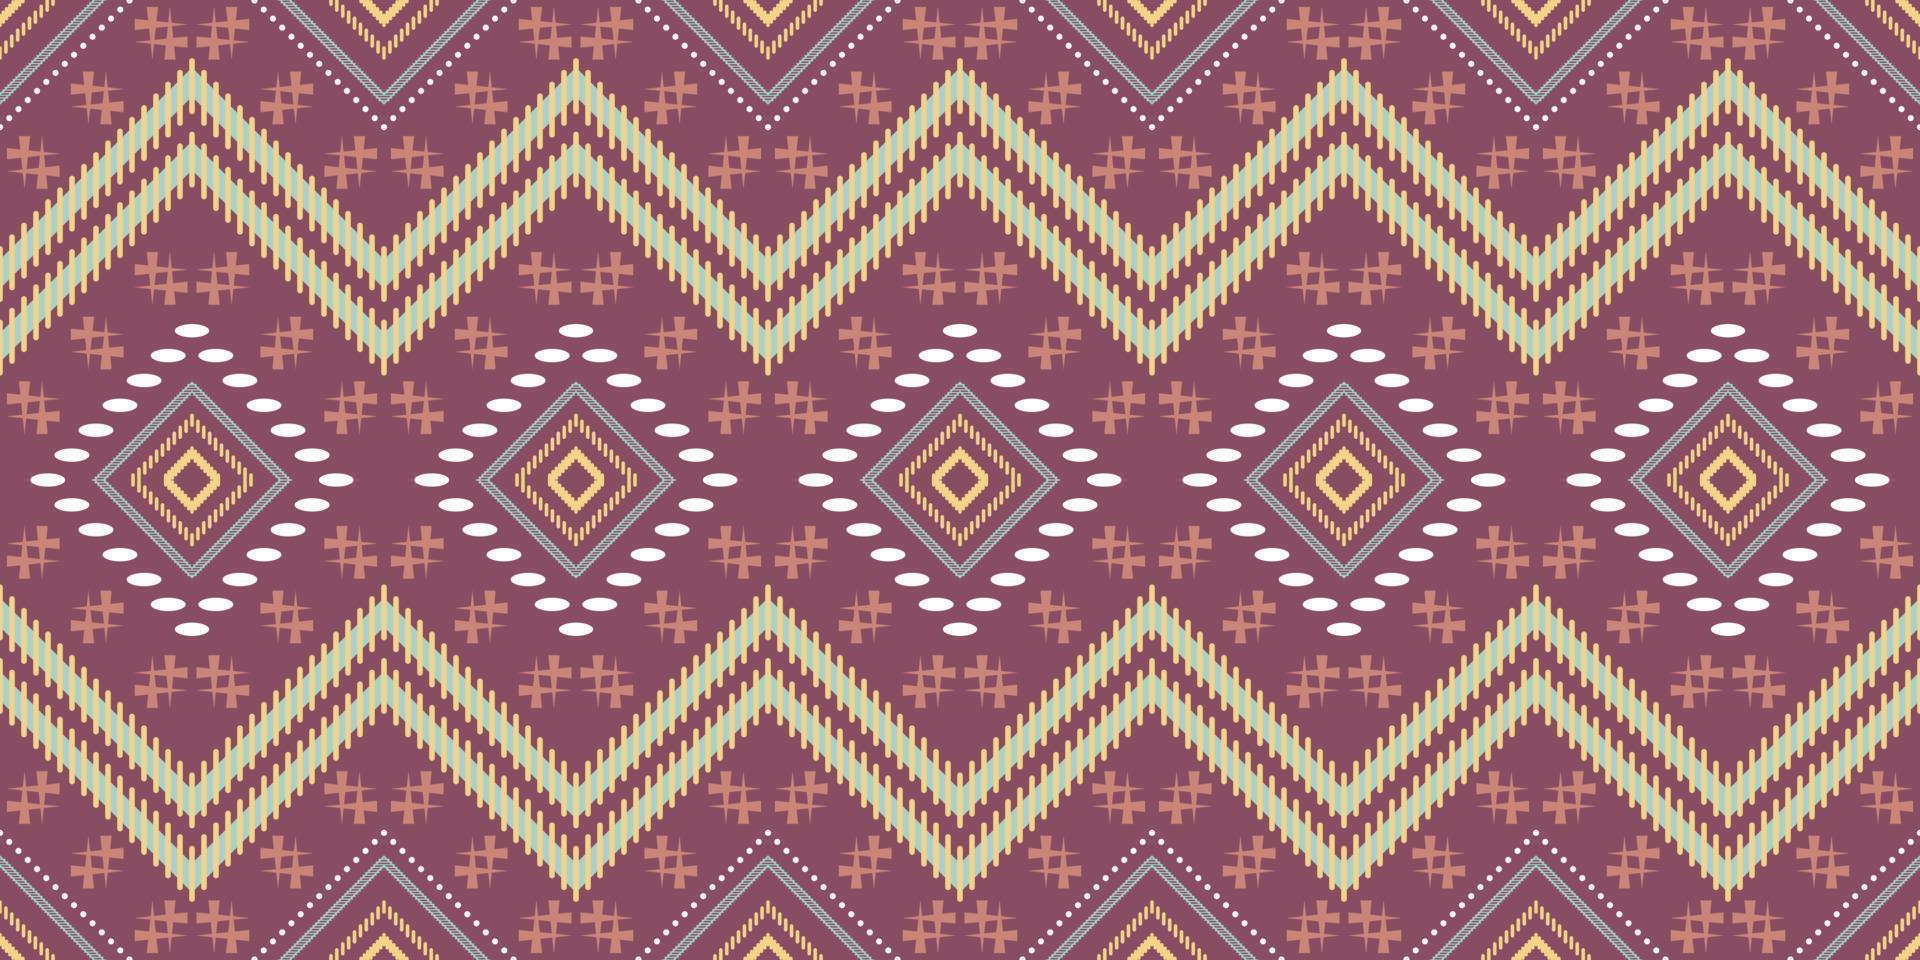 Ethnic textile fabric patterns background. Tribal Ikat geometry fabric seamless pattern vintage retro style. African motif royal luxurious ornate elegant ancient abstract ornament print vector. vector